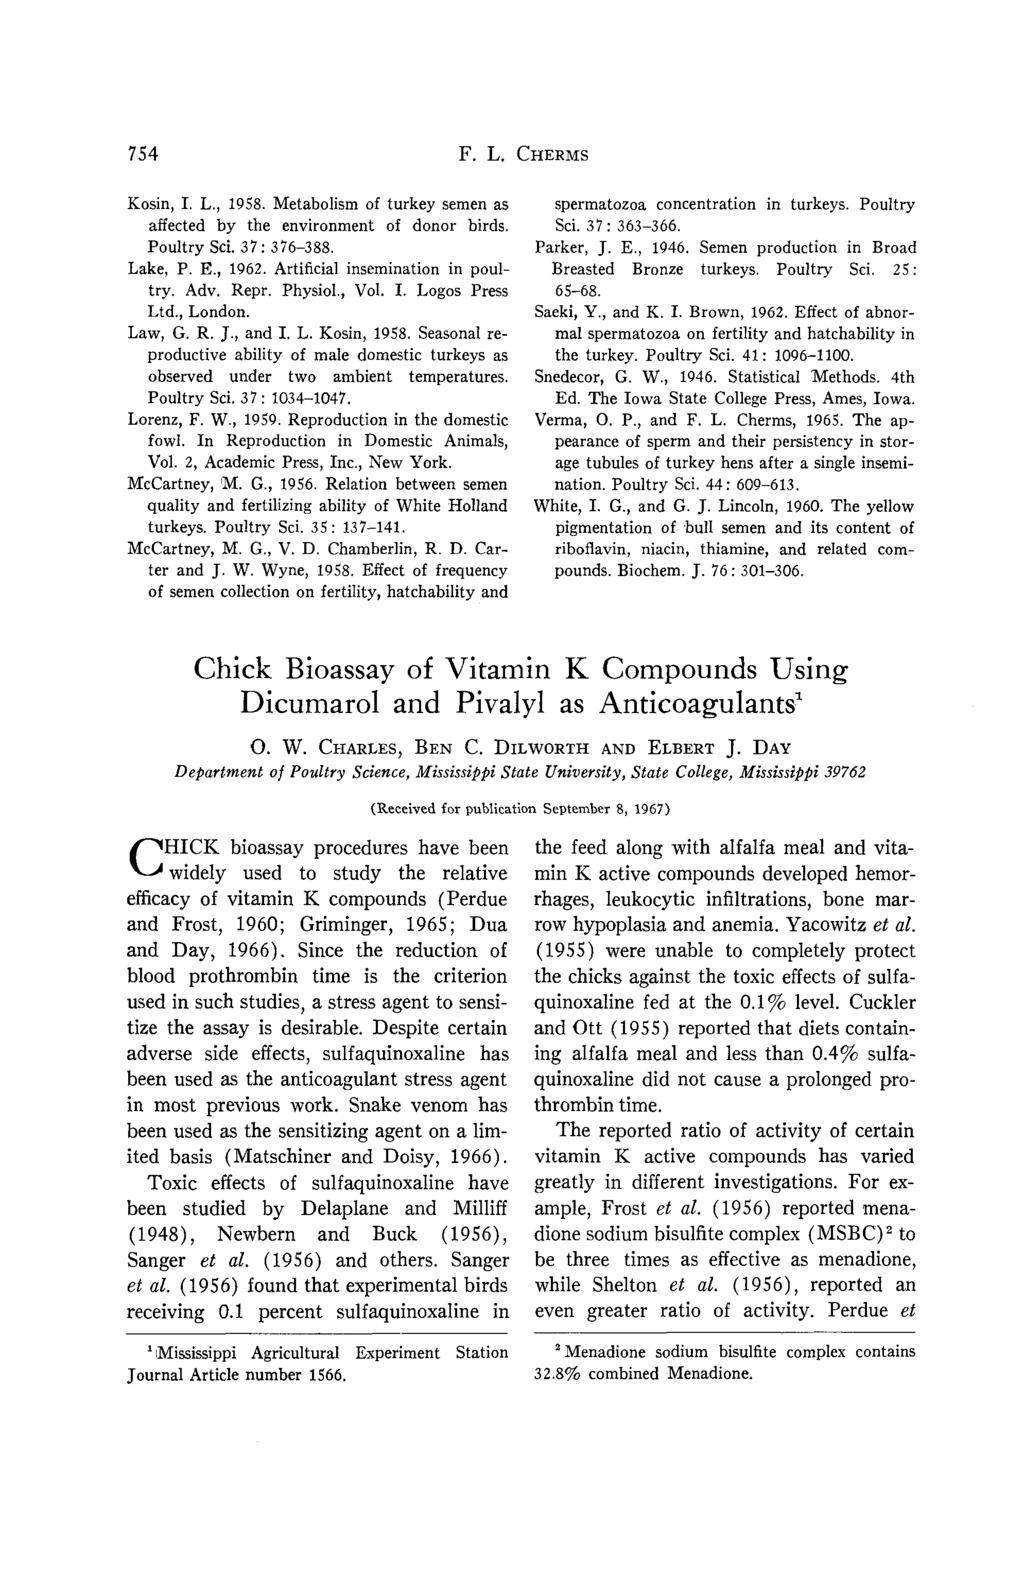 754 F. L. CHERMS Kosin, I. L., 1958. Metabolism of turkey semen as affected by the environment of donor birds. Poultry Sci. 37: 376-388. Lake, P. E., 1962. Artificial insemination in poultry. Adv.